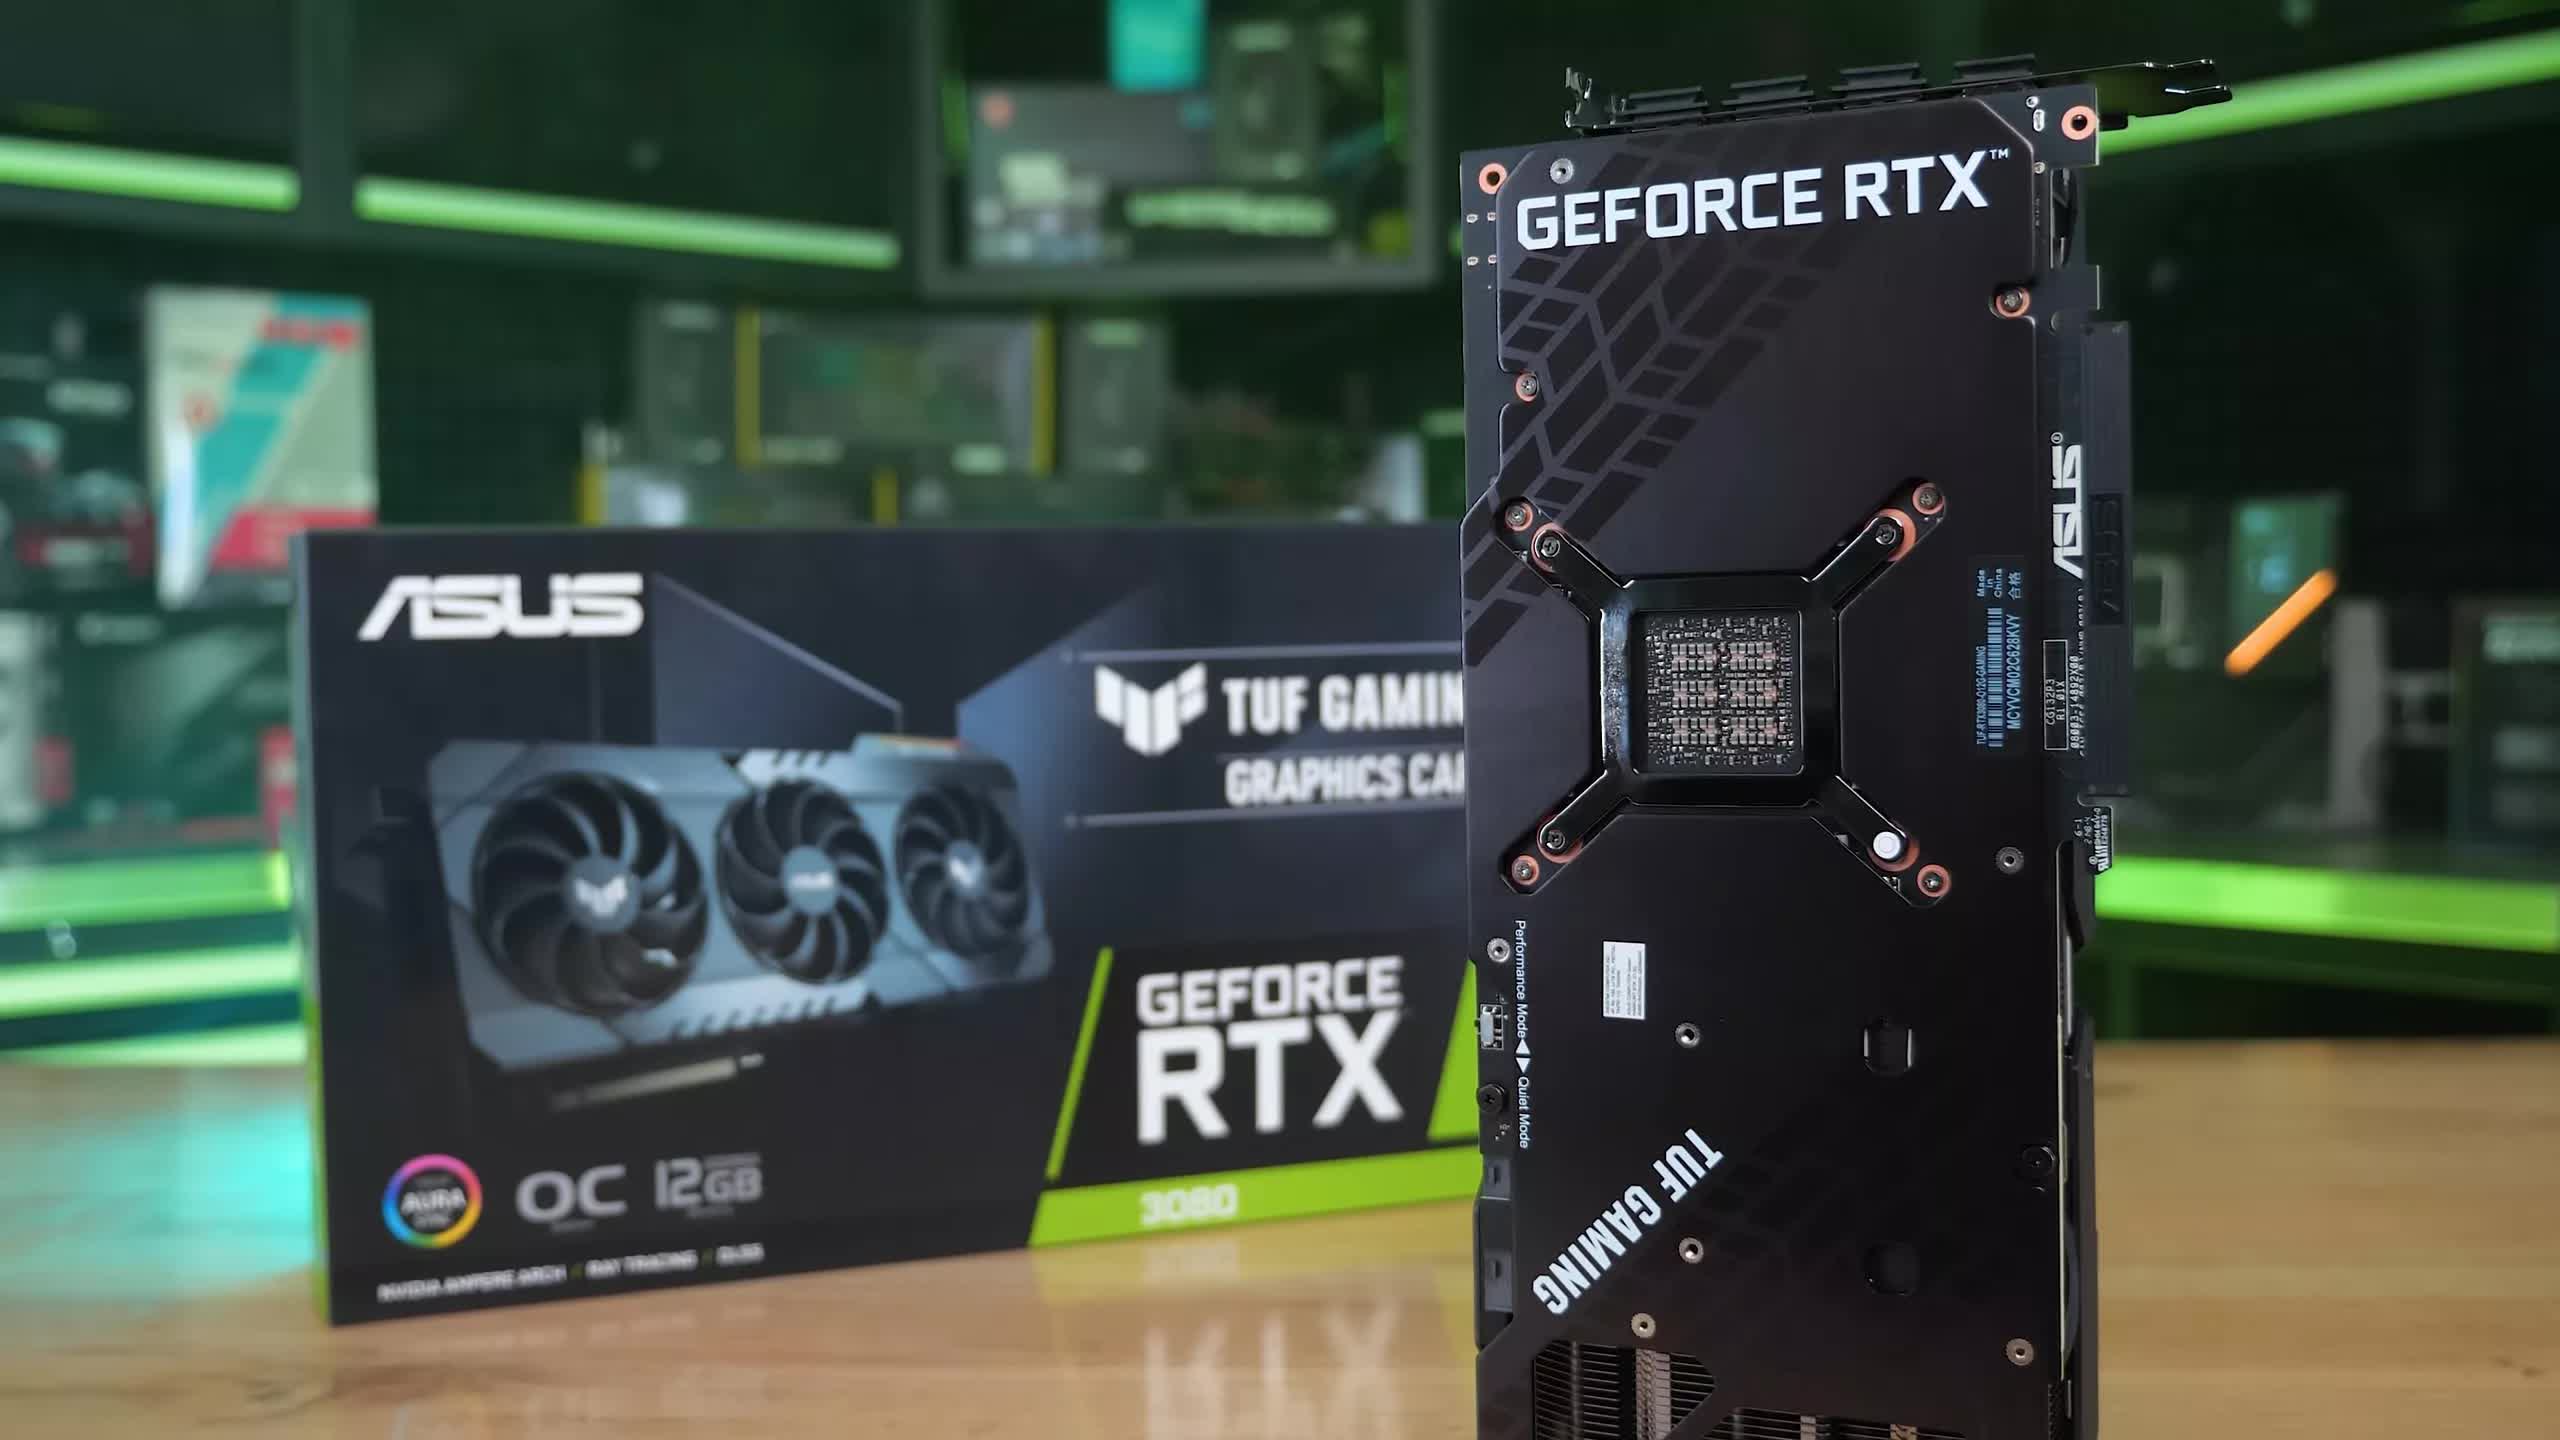 GPU demand slowed in the first months of 2022, but the market is still poised for solid growth